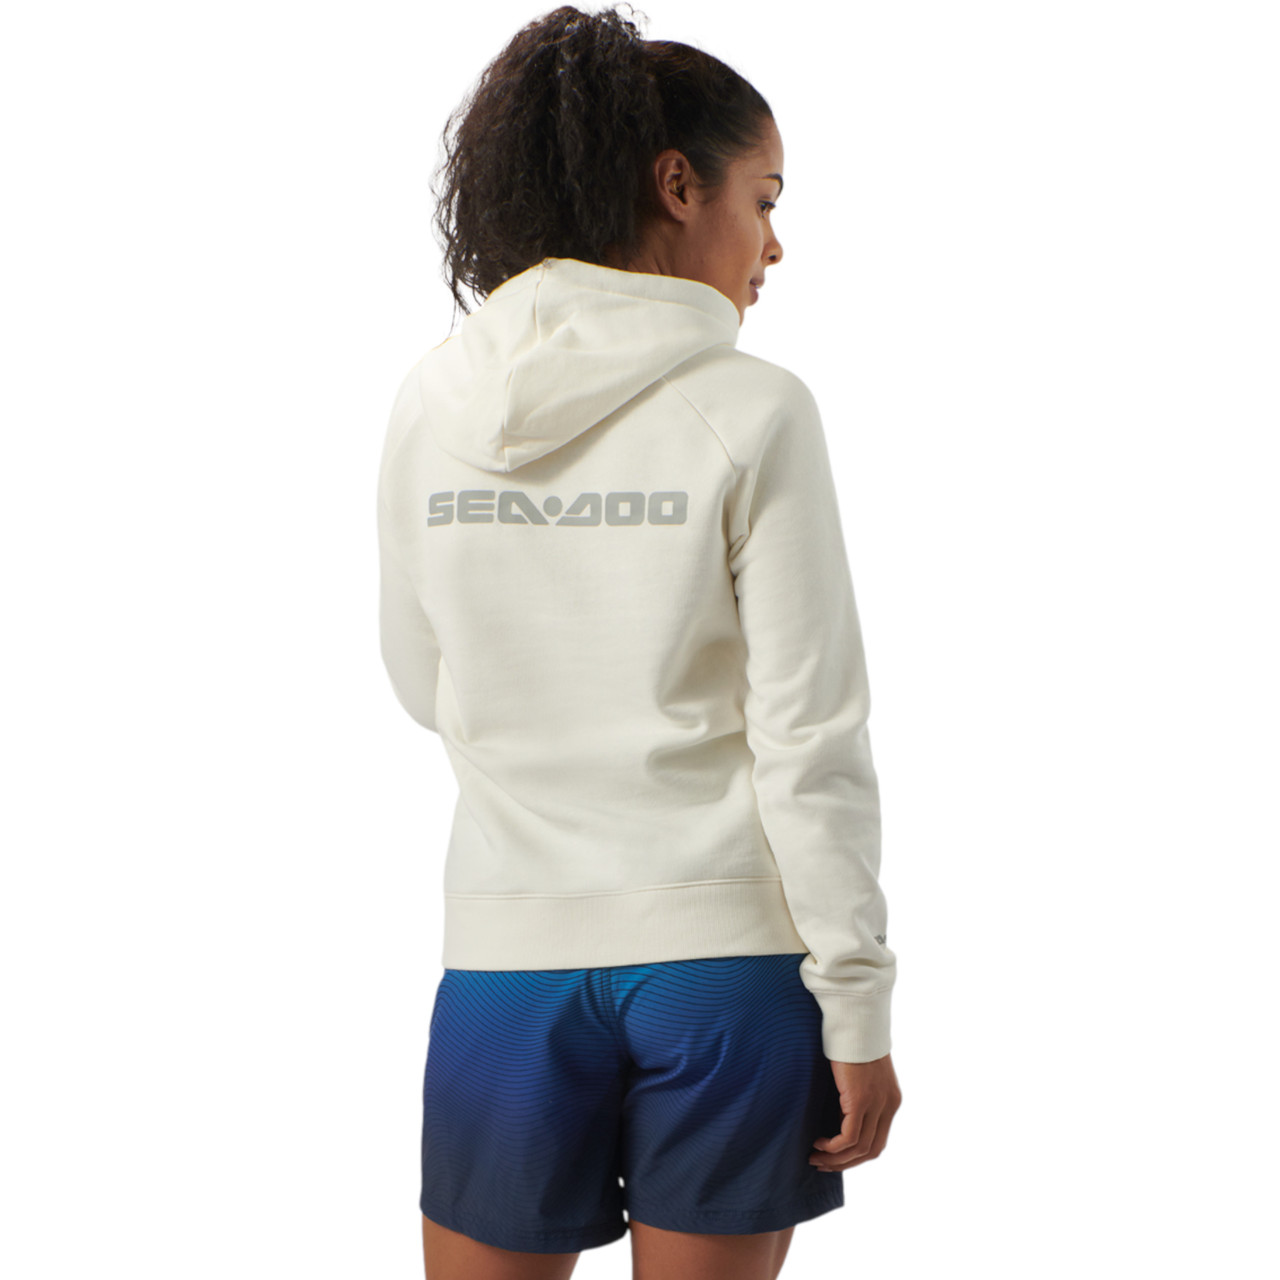 Sea-Doo New OEM, Women's Small Cotton-Polyester Pullover Hoodie, 4546790401